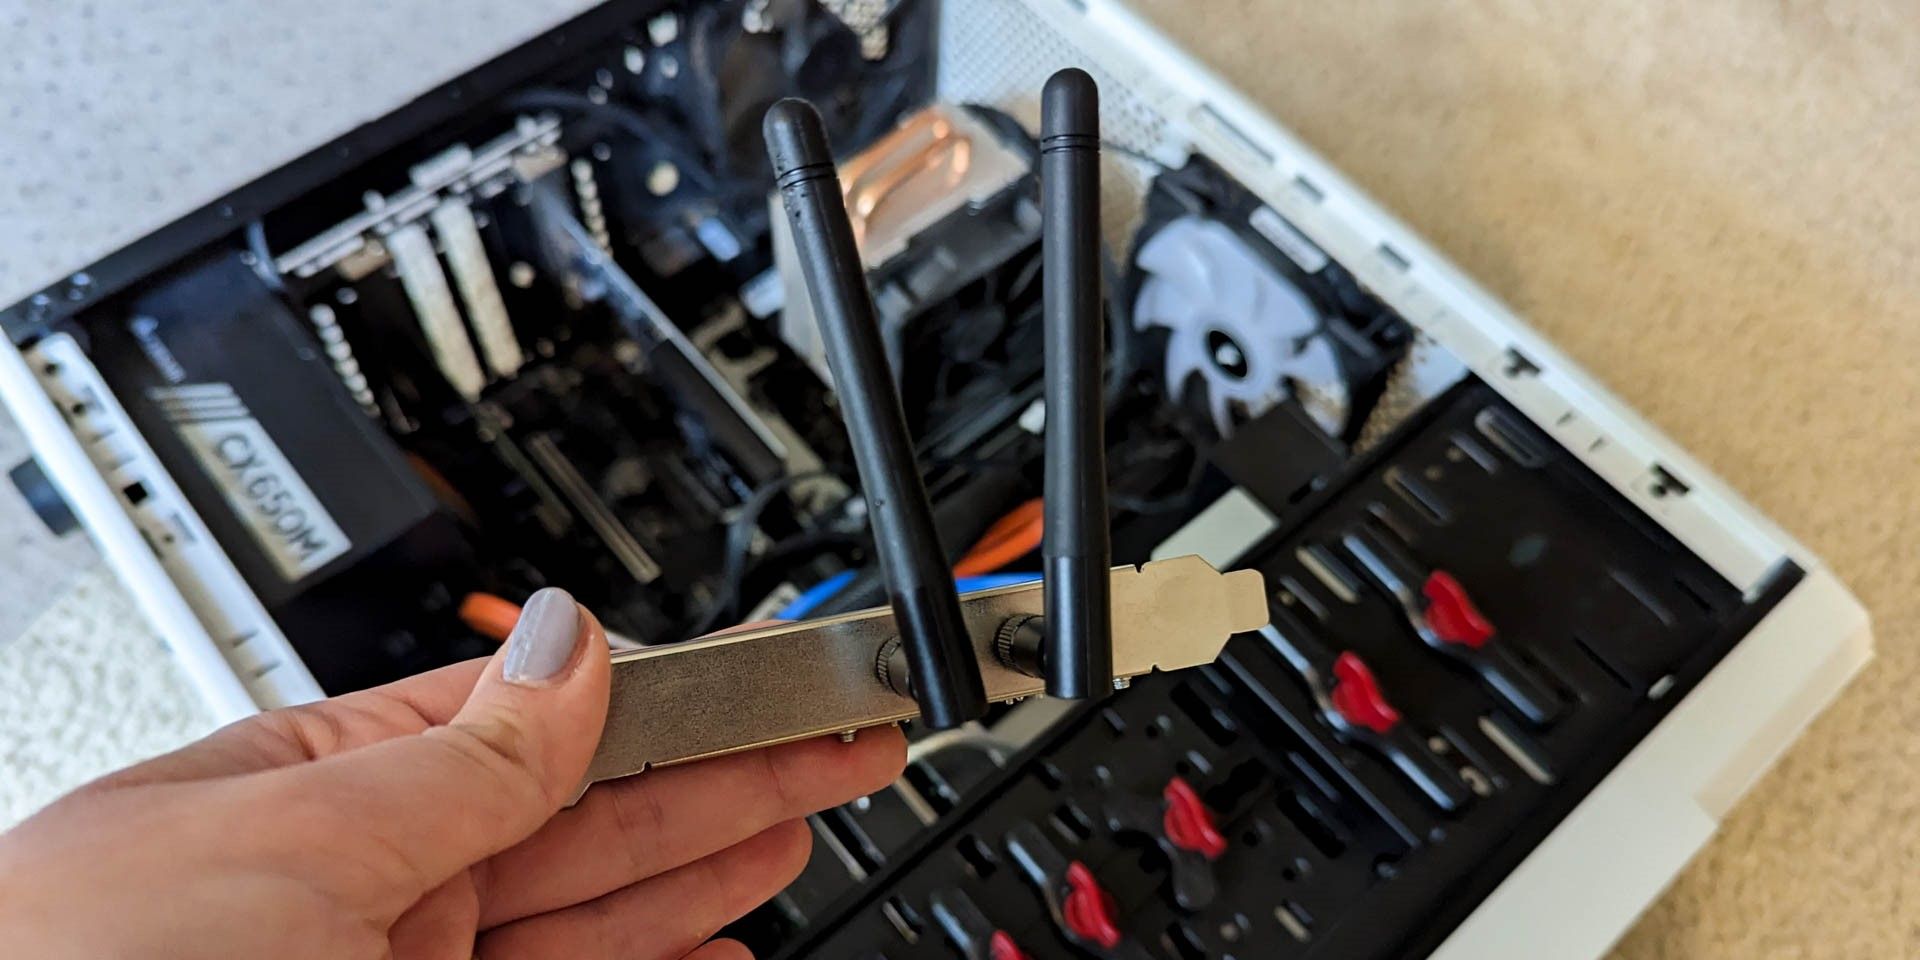 Person holding a TP Link Wifi Card above an open PC